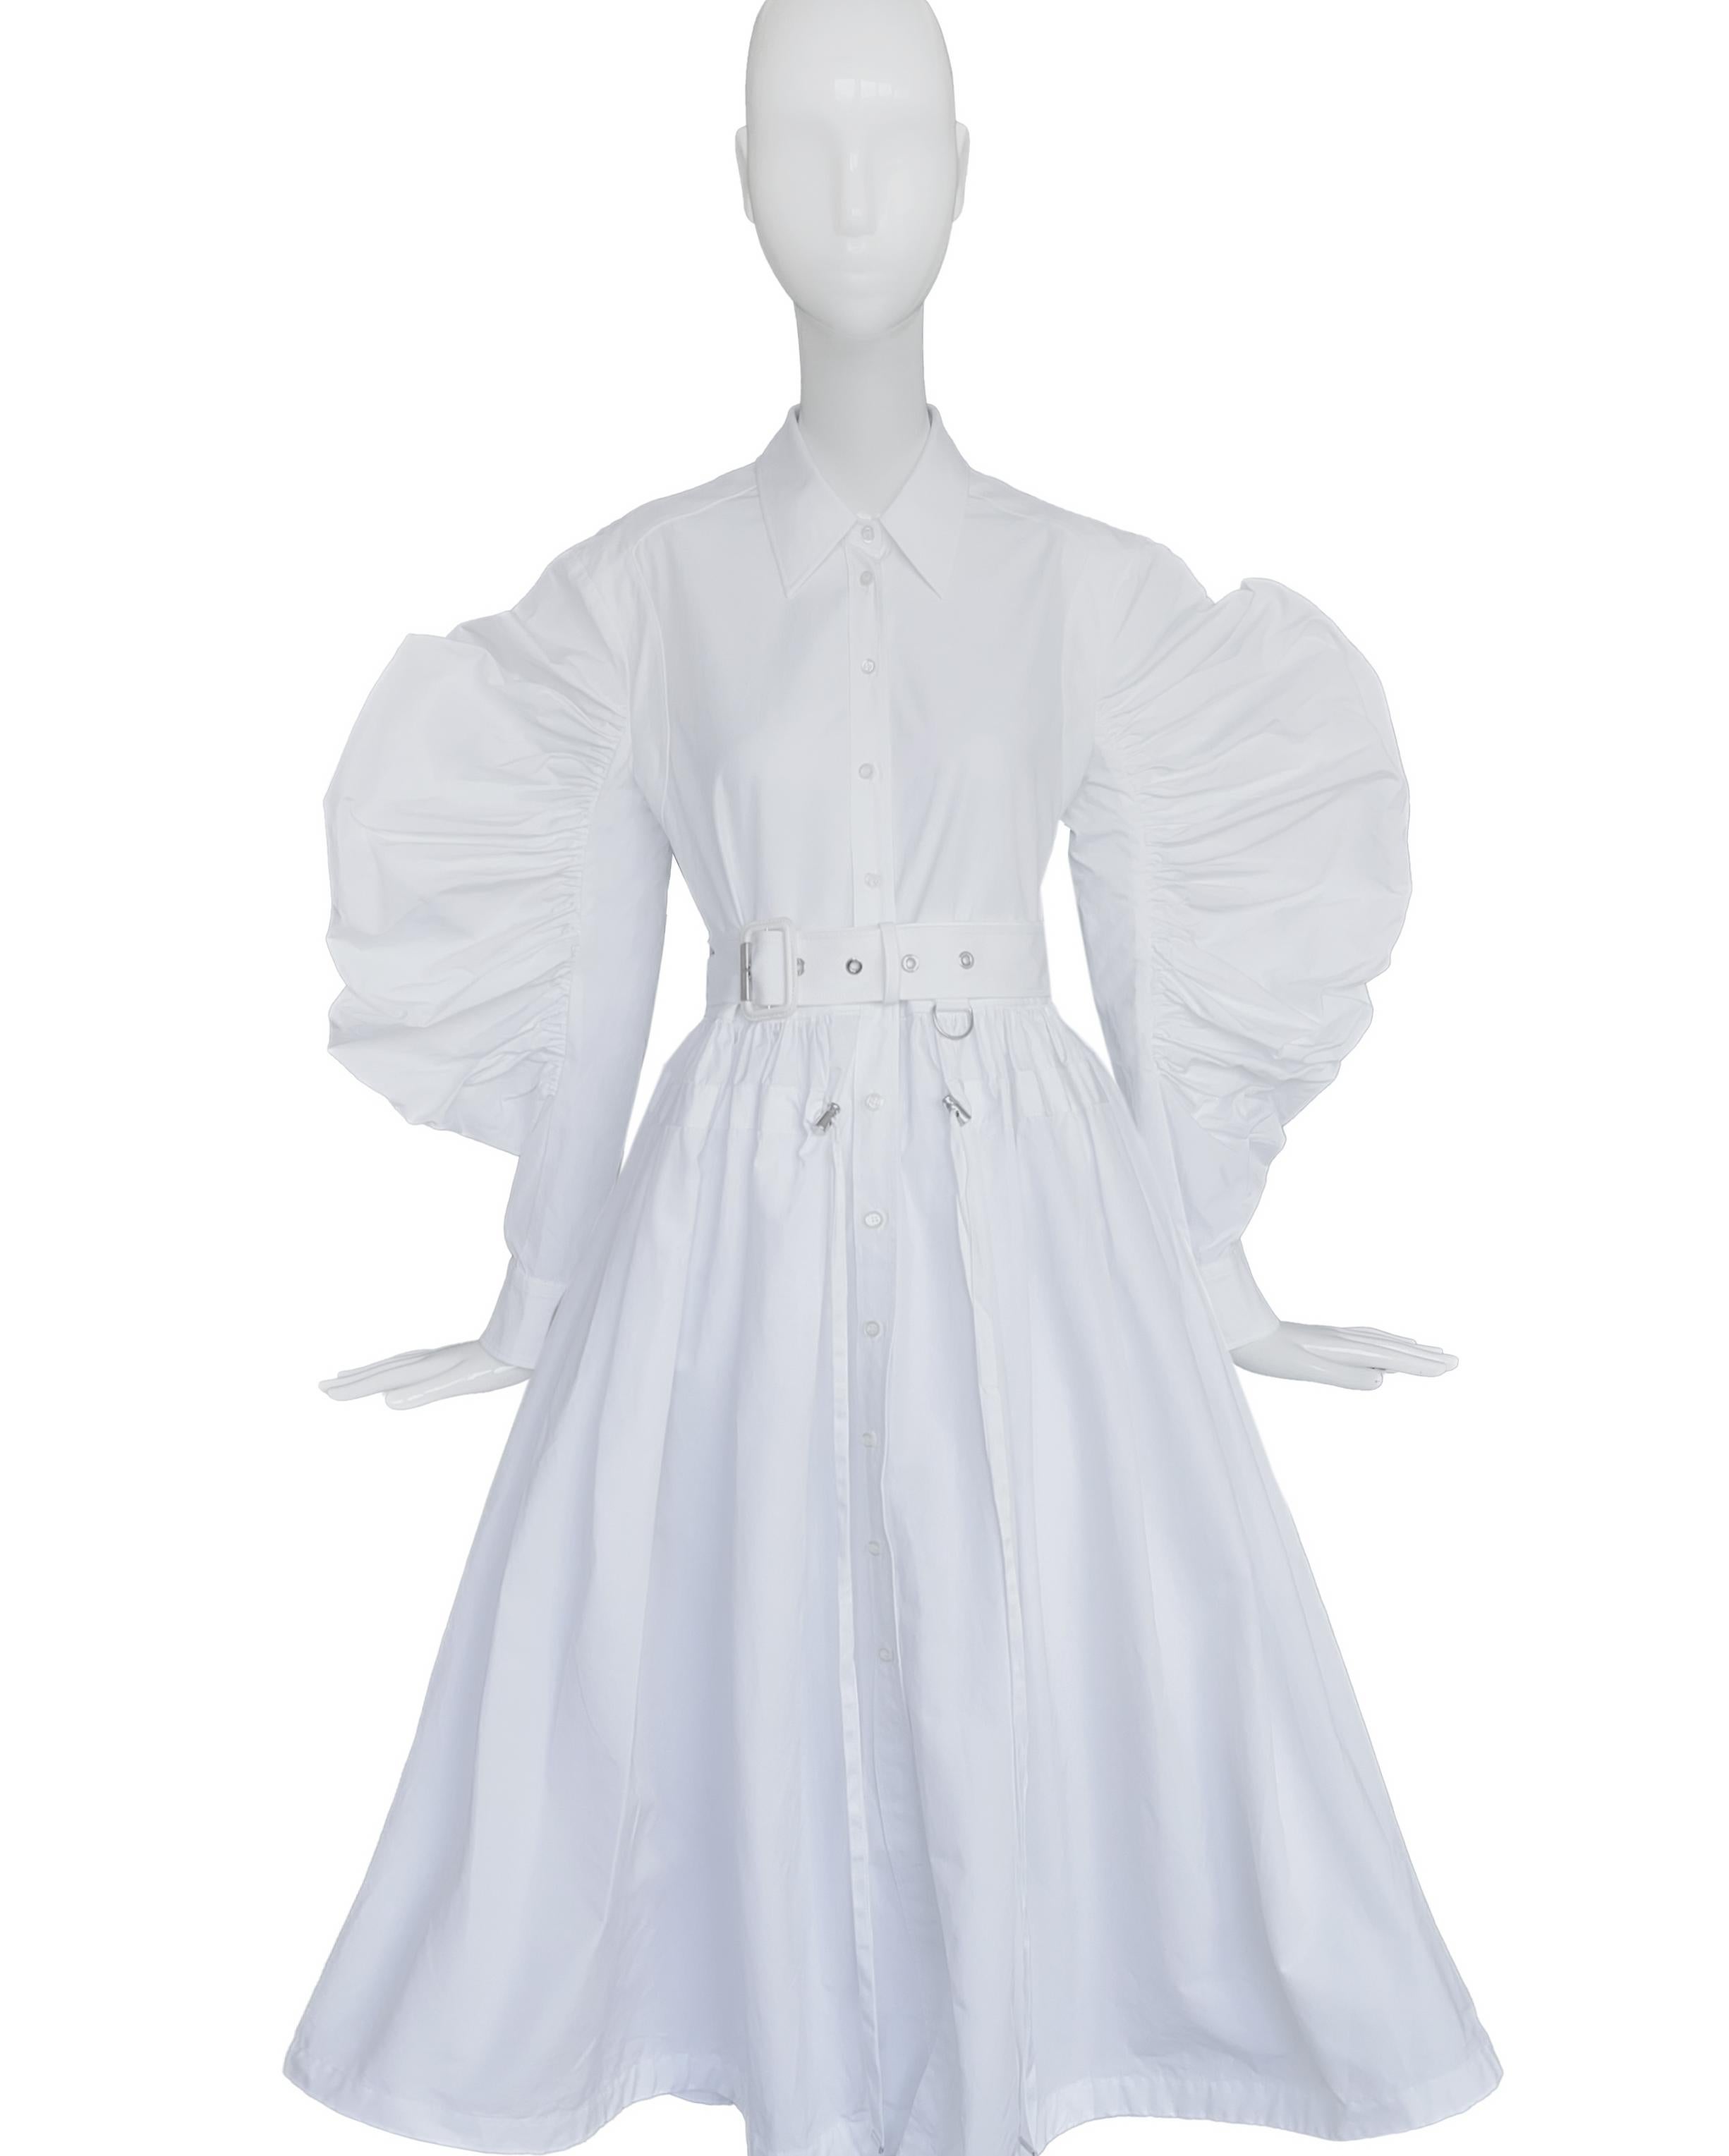 Alexander McQueen Dress SS 2021 Dramatic Sleeve White For Sale 7